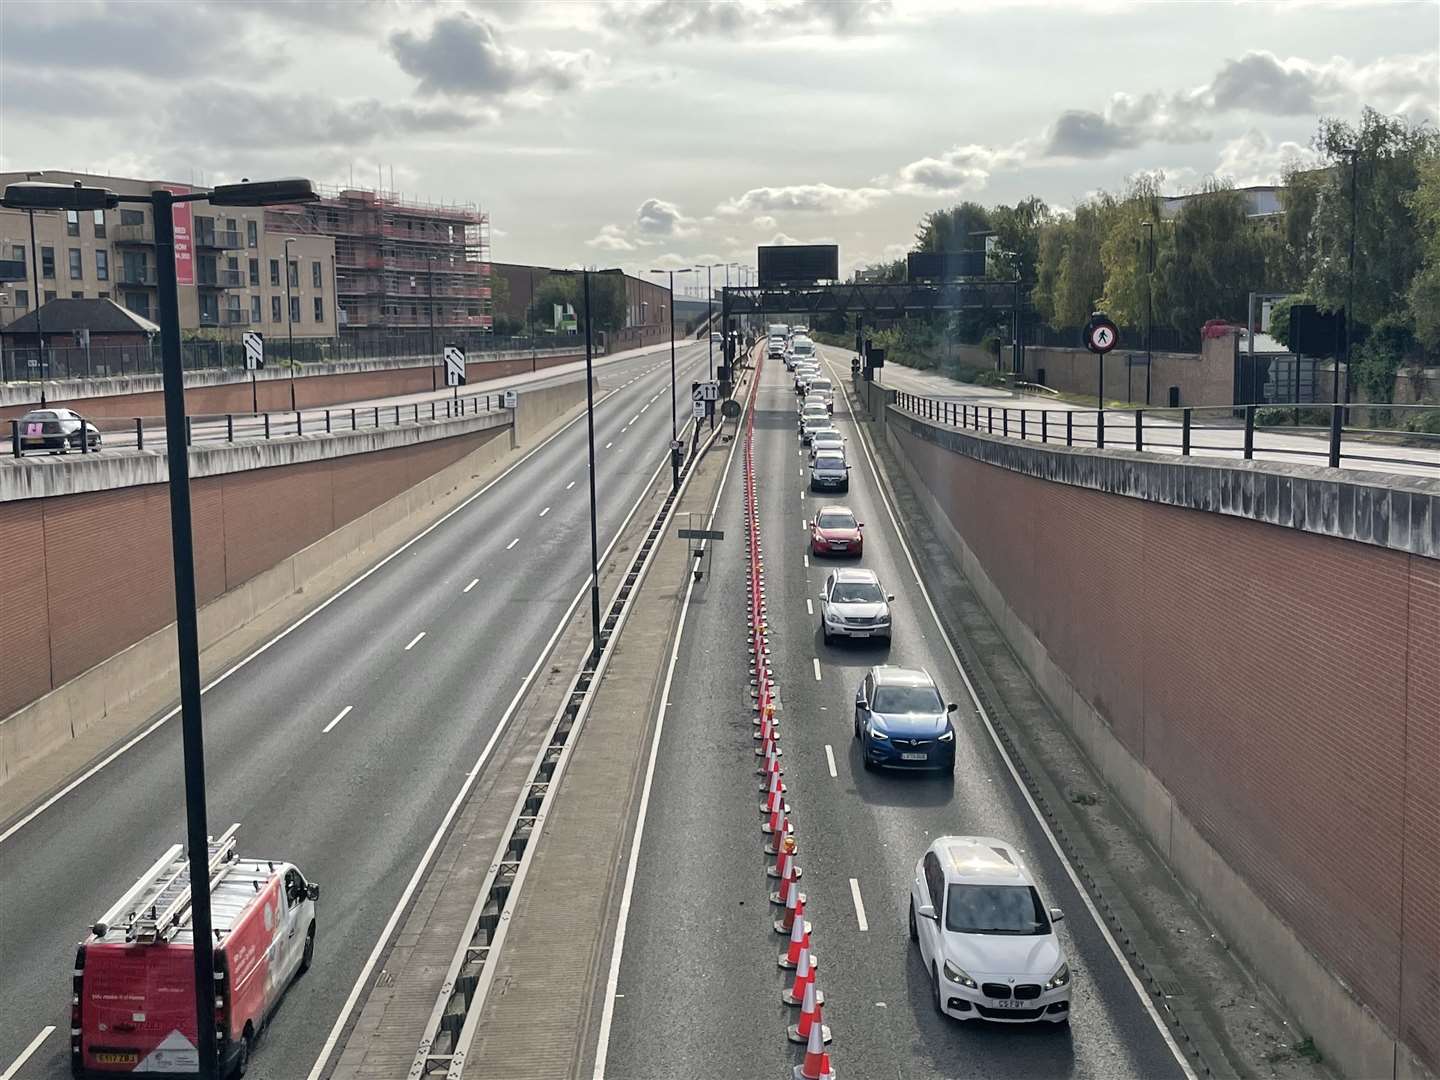 The queues through Medway Tunnel have been a daily occurrence for drivers since September